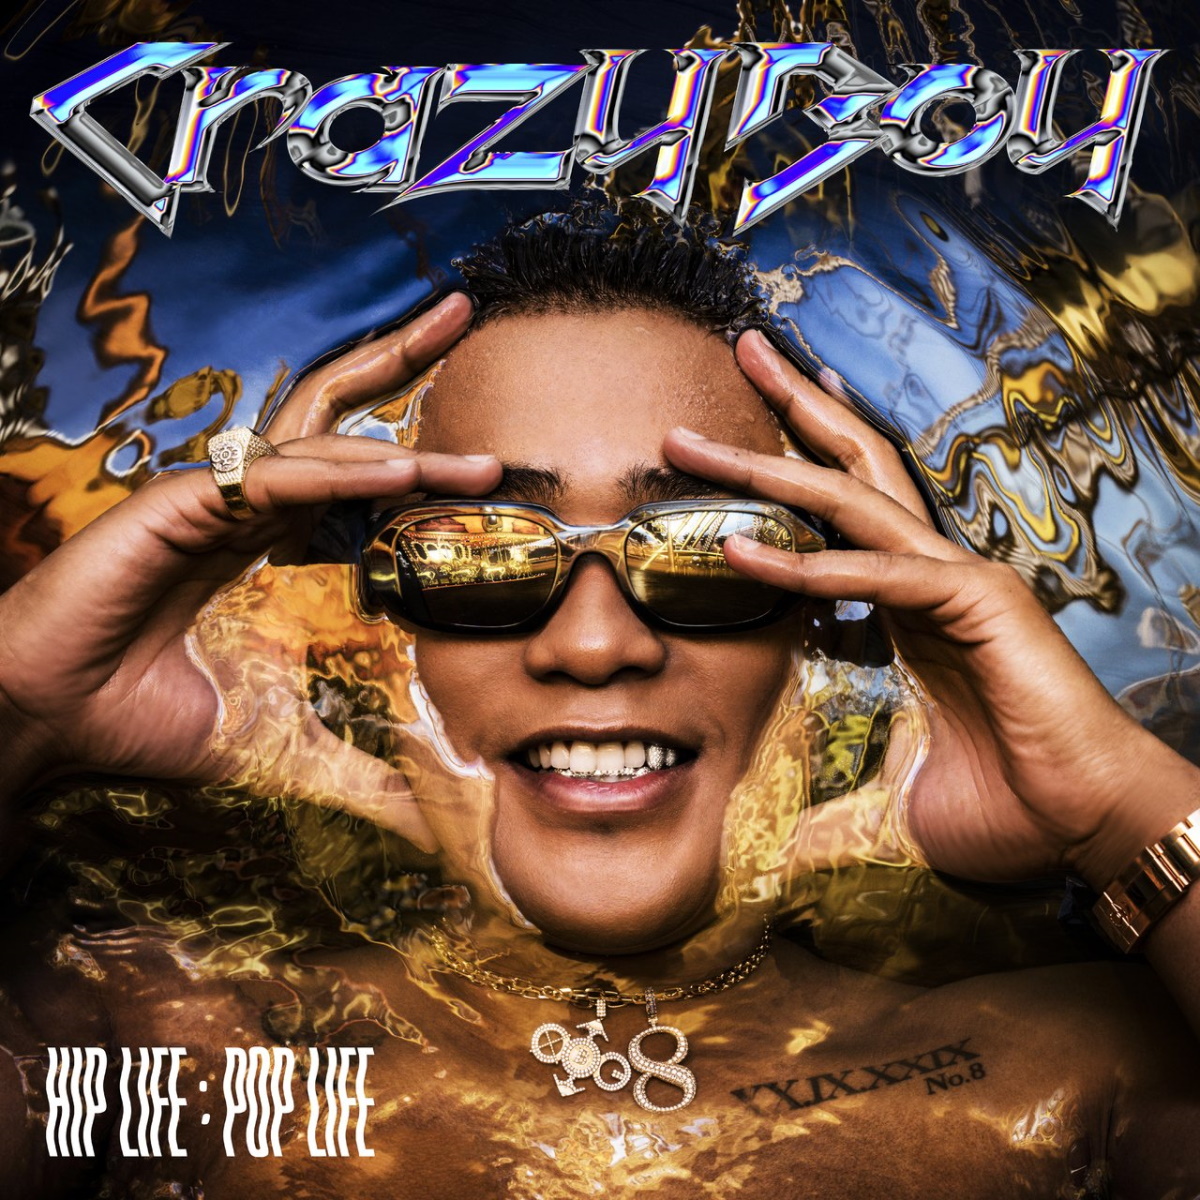 Cover for『CrazyBoy - Ex-GIRLFRIEND / Lovers Again』from the release『HIP LIFE：POP LIFE』